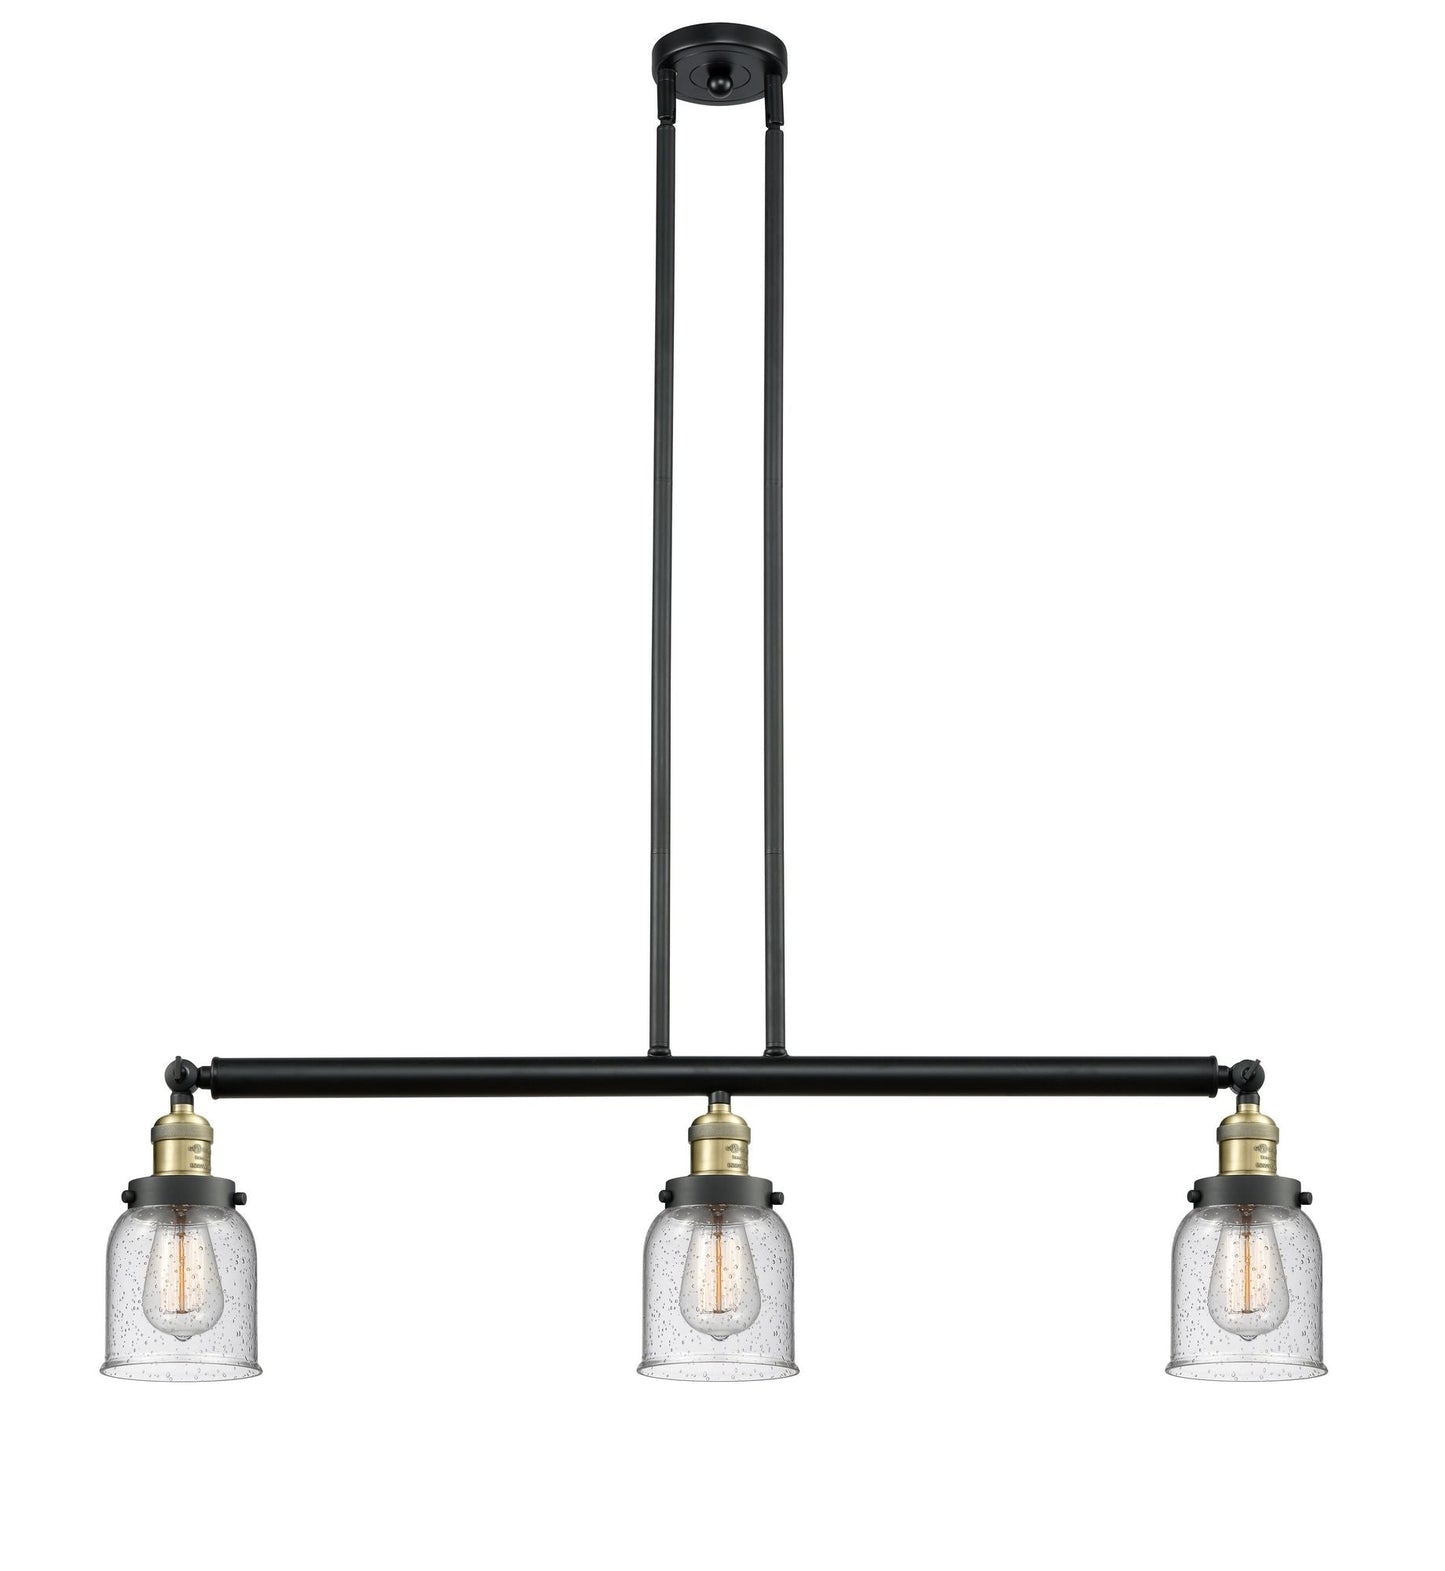 213-BAB-G54 3-Light 37.5" Black Antique Brass Island Light - Seedy Small Bell Glass - LED Bulb - Dimmensions: 37.5 x 7.5 x 10<br>Minimum Height : 20<br>Maximum Height : 44 - Sloped Ceiling Compatible: Yes